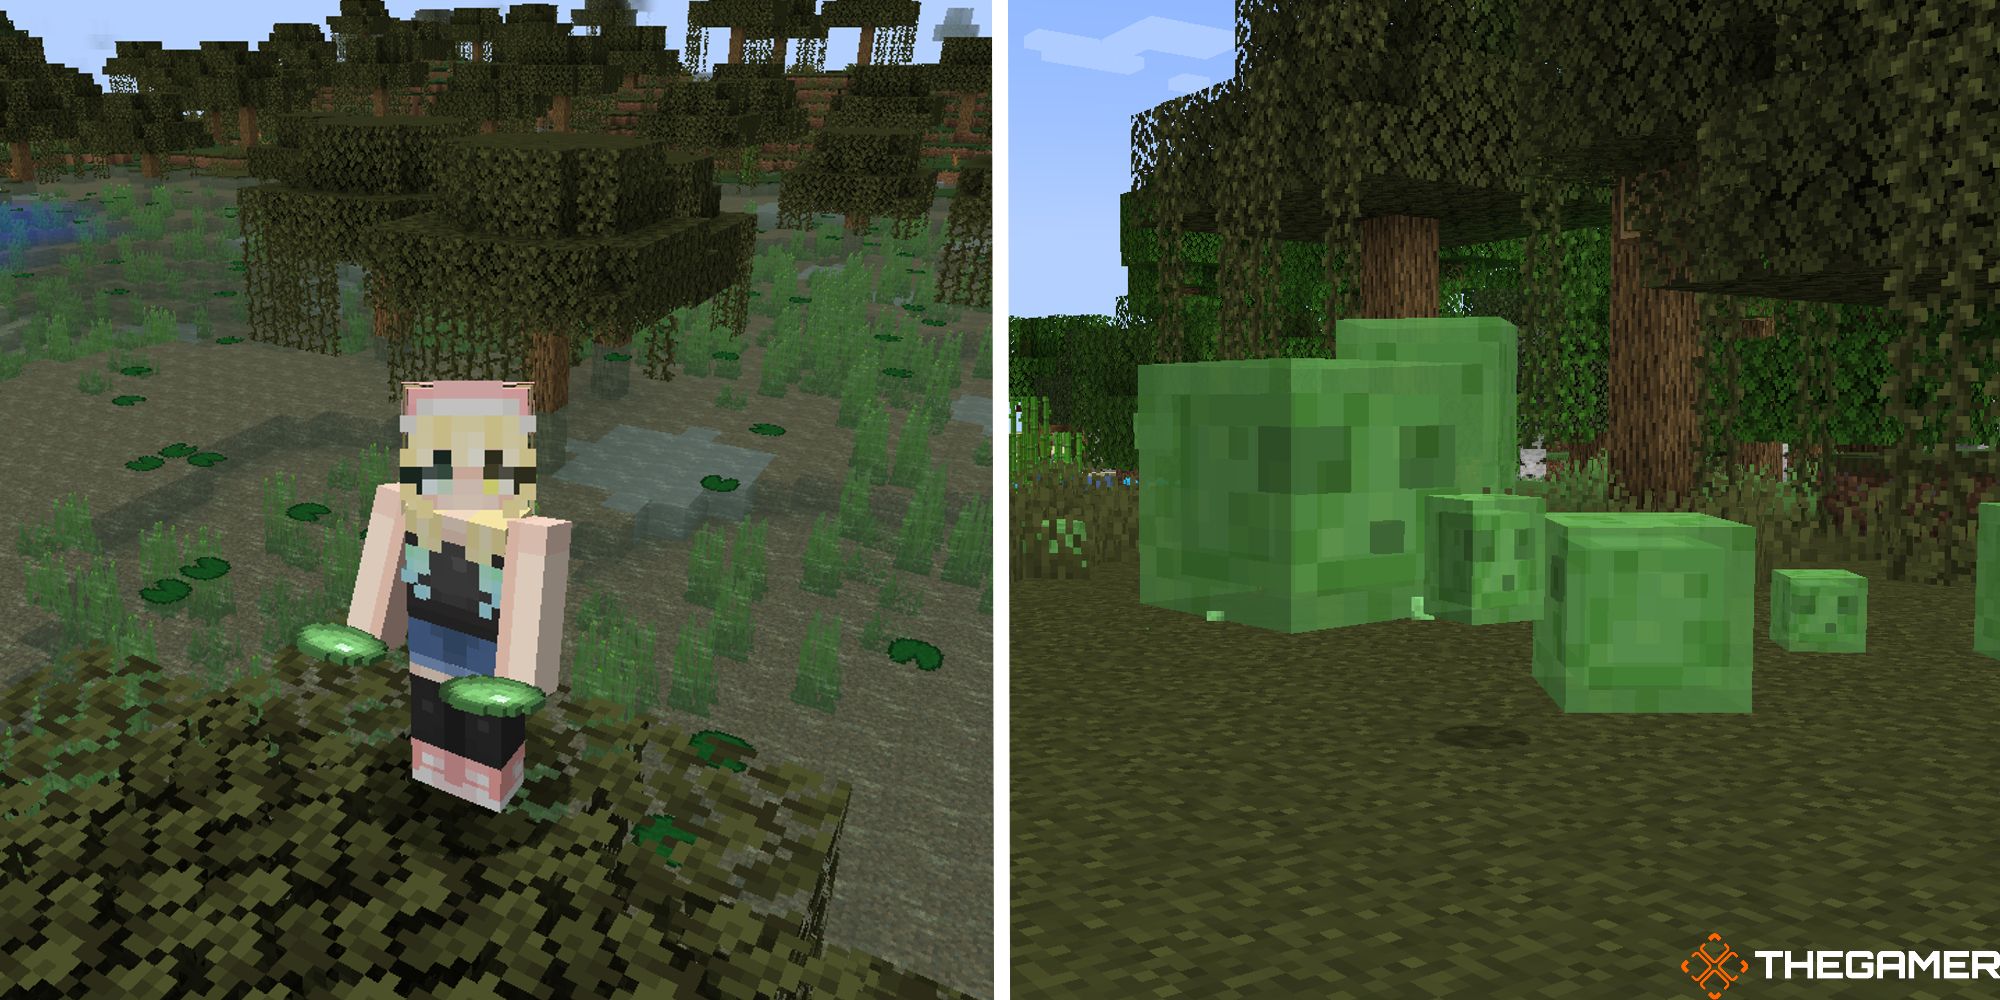 split image of minecraft player in swamp holding 2 slime balls next to image of slimes in group